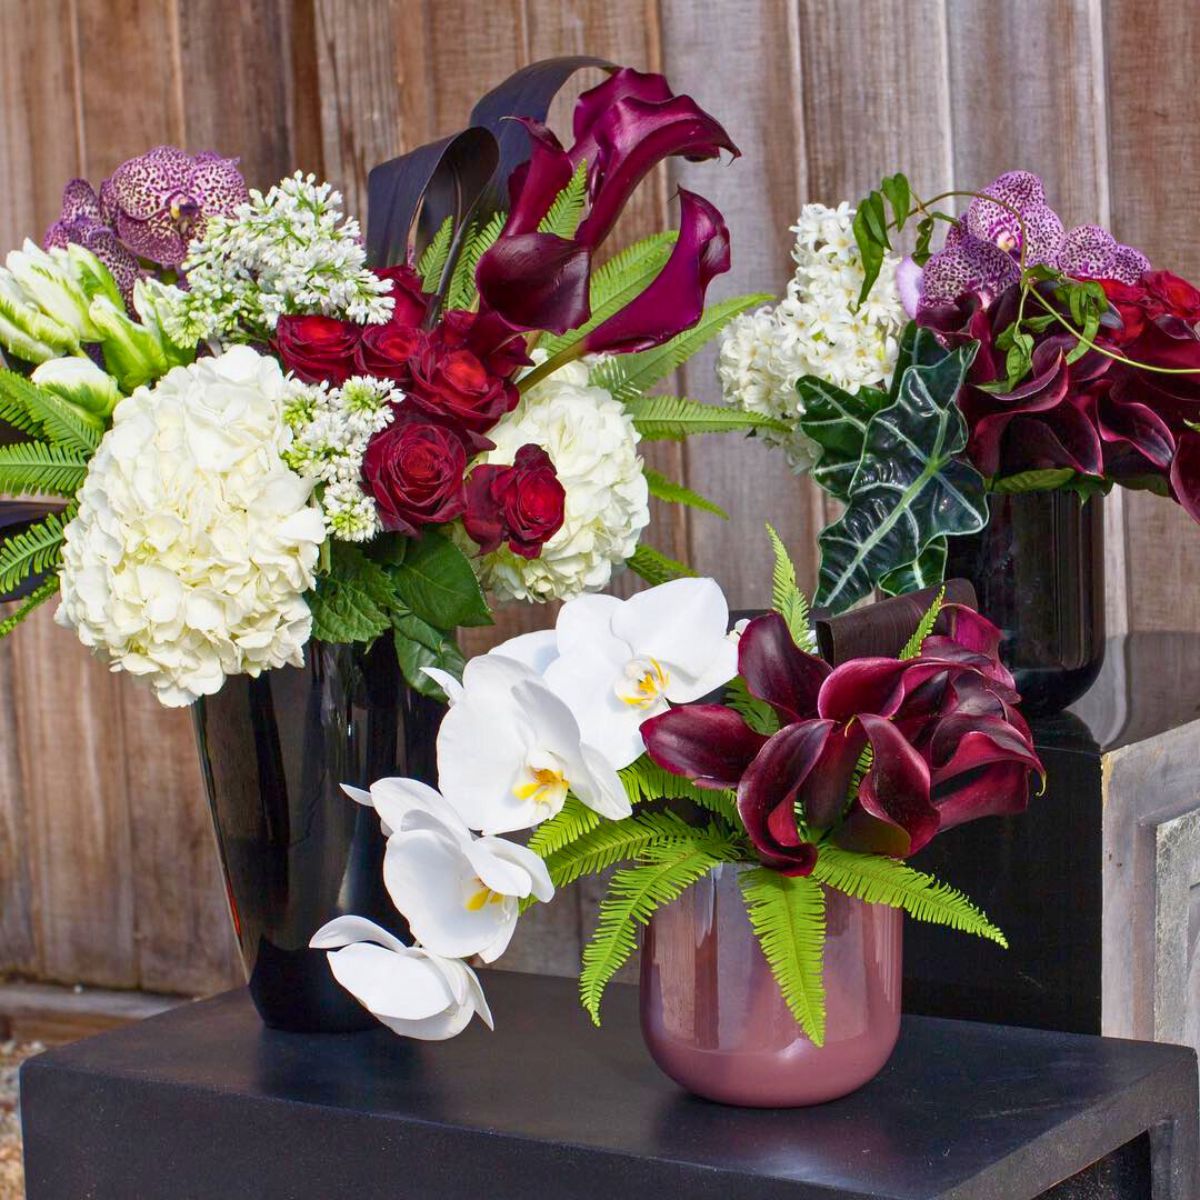 Different types of arrangements with callas for Vday